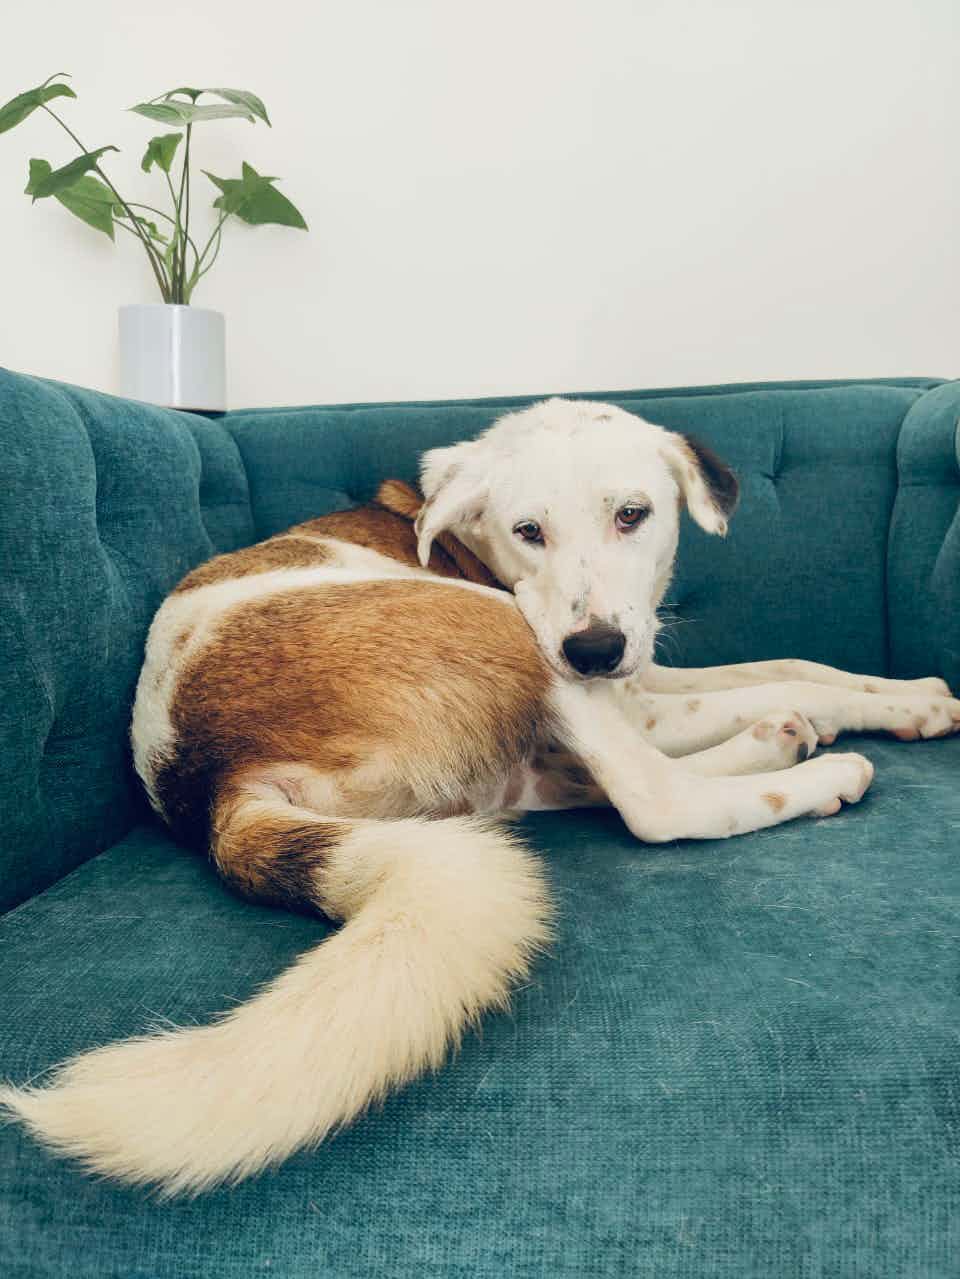 Bangalore adoption appeal : 

ADOPT OREO 🐶 (not Oreo cookie ) 🙈 

This adorable small compacted boy . 

Hes a 1 year old , vaccinated and neutered . He’s a mix , so he’s not that big or small .  He is a indie mix . Not sure which breed ( doesn’t matter anyways cuz he’s a munchkin ) 🍒
 
He needs to be on a meat based diet . extremely social, confident, loving & trainable. A very kind & intelligent boy, a quick learner, he is guaranteed to steal your heart  choose to meet him.
 

He’ll be fit for a apartment as well  friendly with other doggos , needs little training to be put in , for the seperation anxiety , etc .  if you are working parents . Which is common around any doggo . 

OREO would be lucky to have anyone who would give him a forever home , likewise you would to . 

To discuss his adoption WhatsApp on 9110698650(no calls )